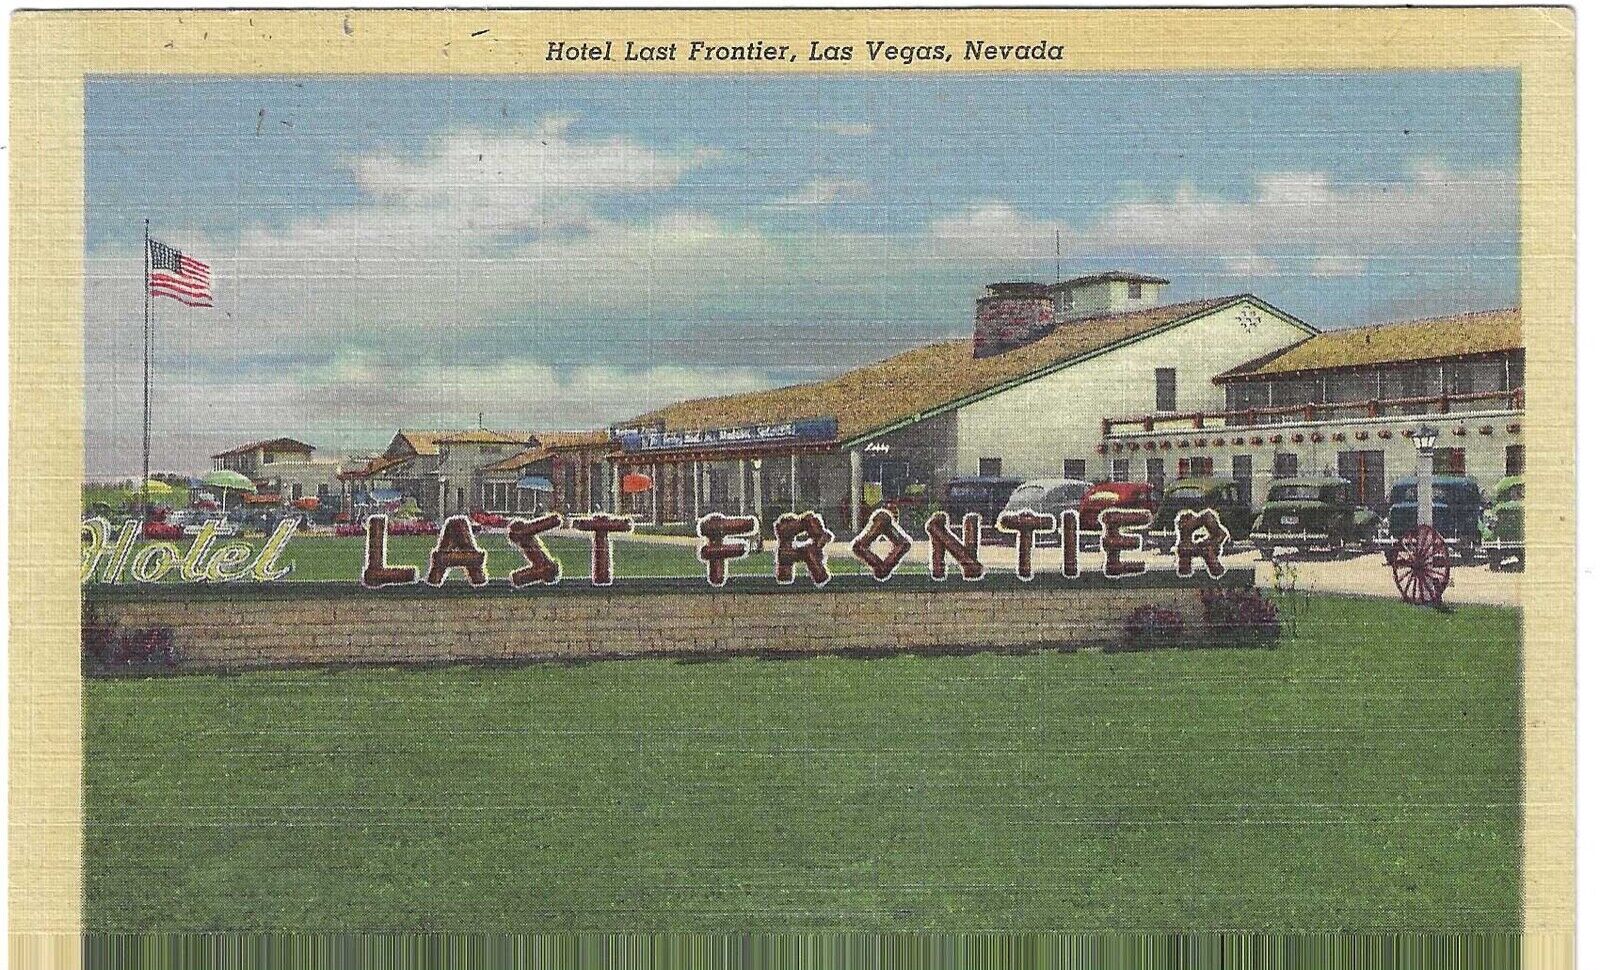 LAS VEGAS, NEVADA POSTCARD Hotel Last Frontier Front View, Sign on Rock Wall